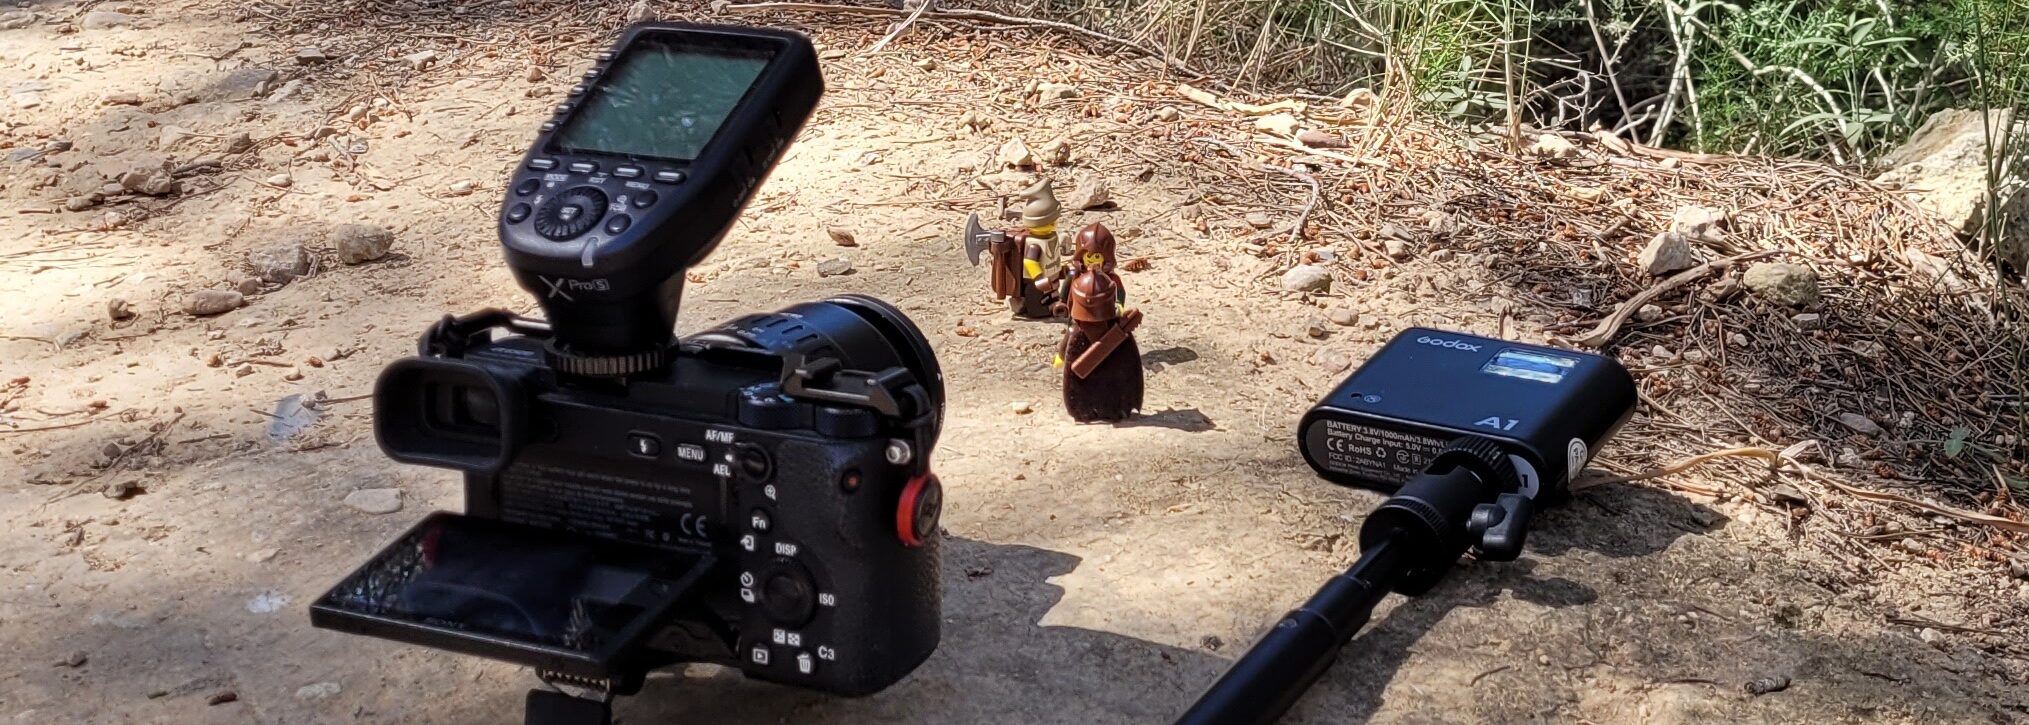 Behind the scenes of a LEGO photography session with camera, flash, and LEGO minifigures